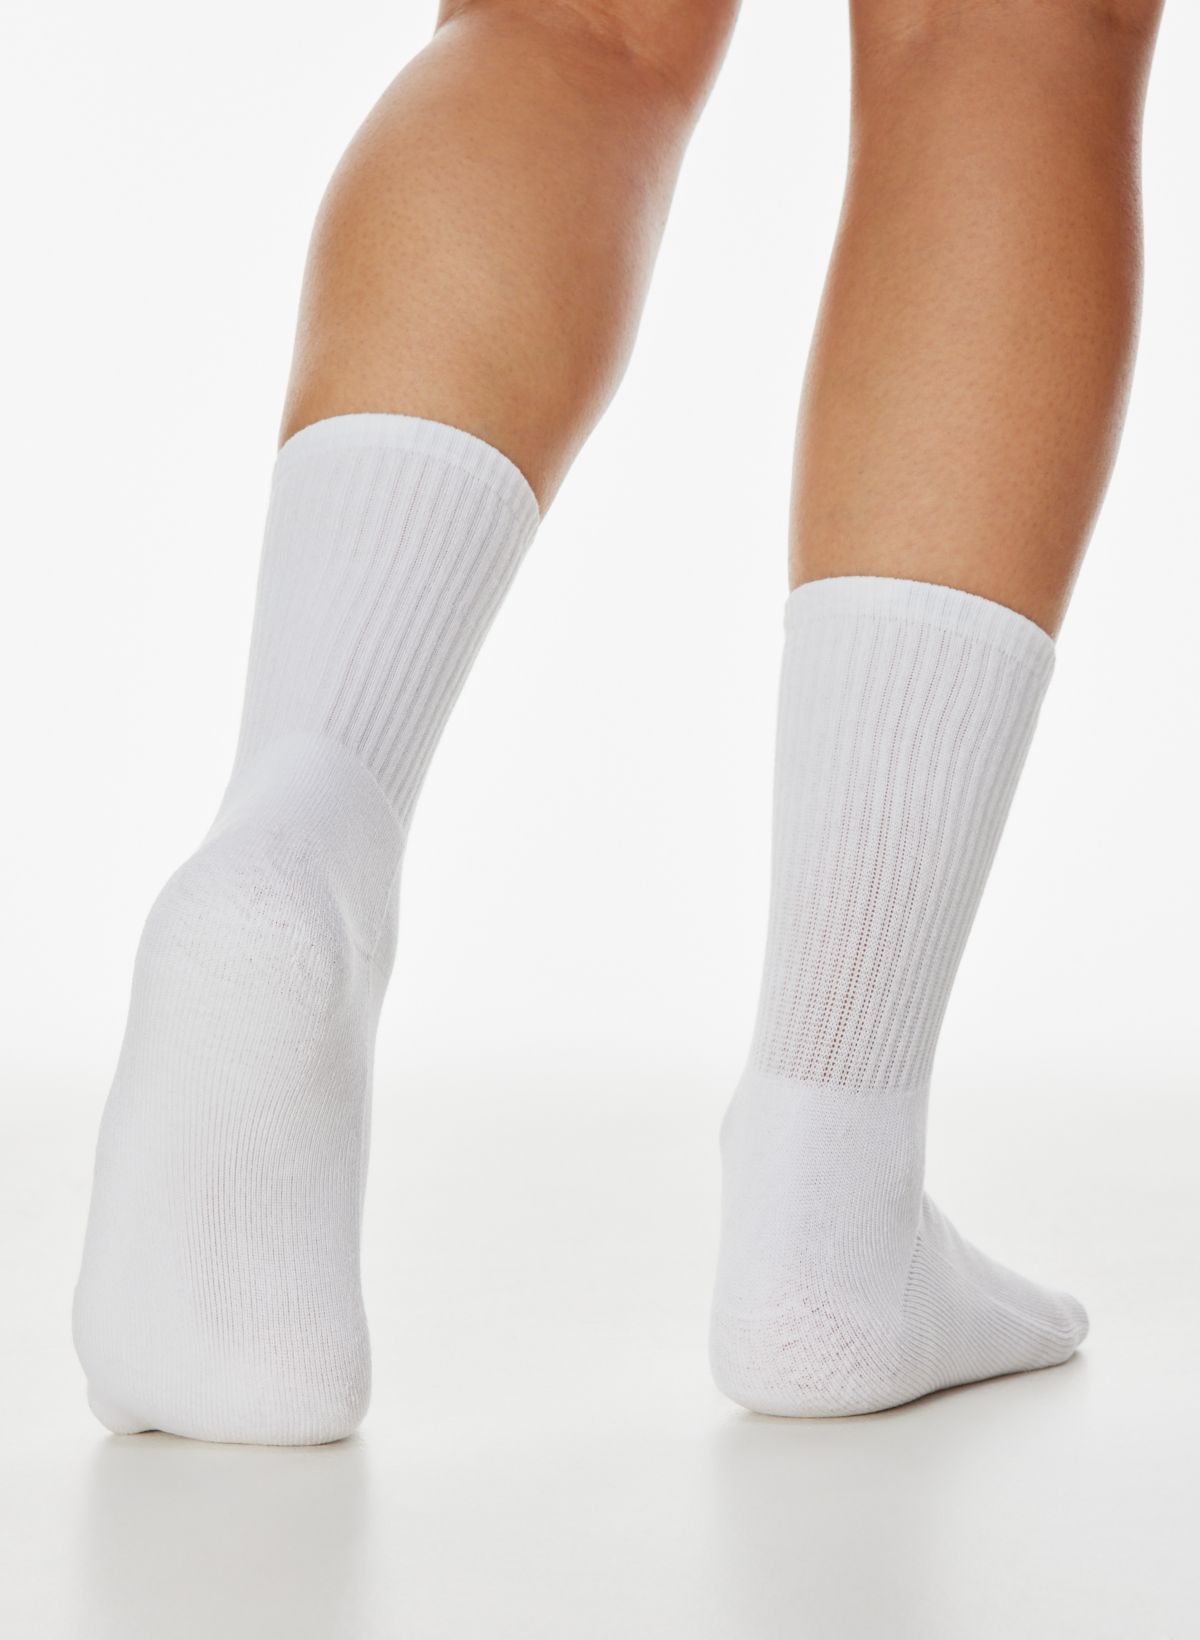 Tna Base Crew Socks 3-Pack in Heather CLD Wt/Heather Chr/Heather Chrcl Size XS/Small | Cotton/Nylon/Polyester